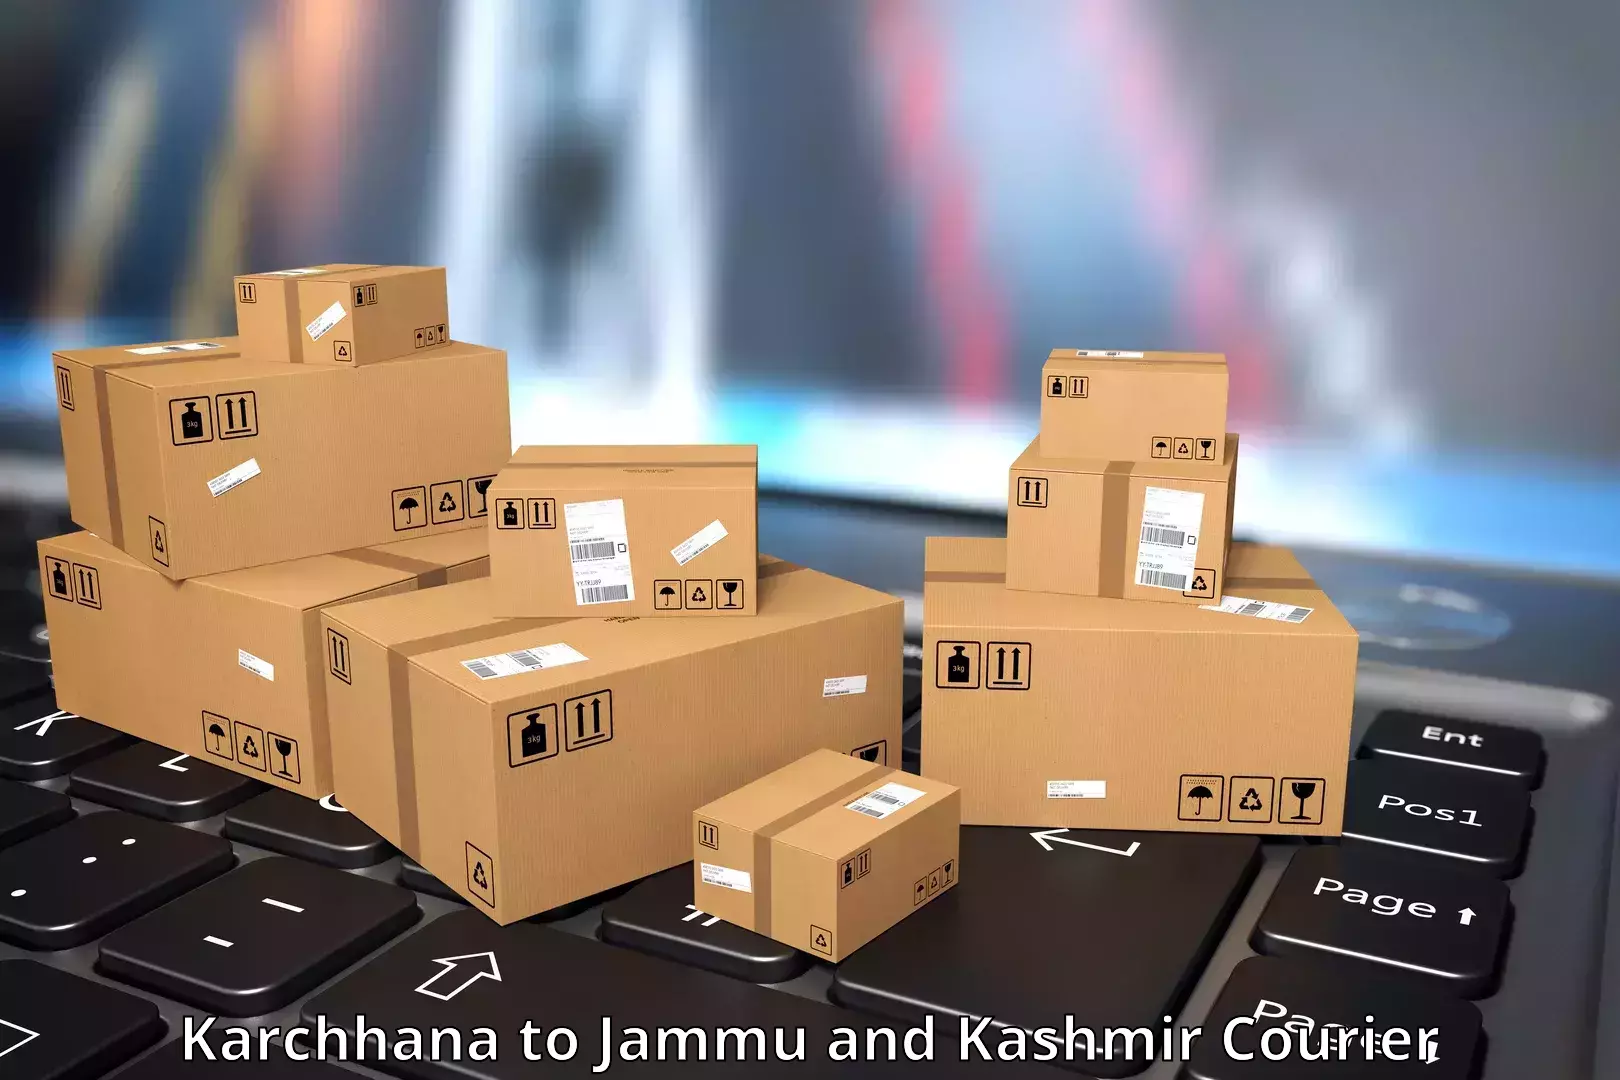 High-speed delivery Karchhana to Baramulla